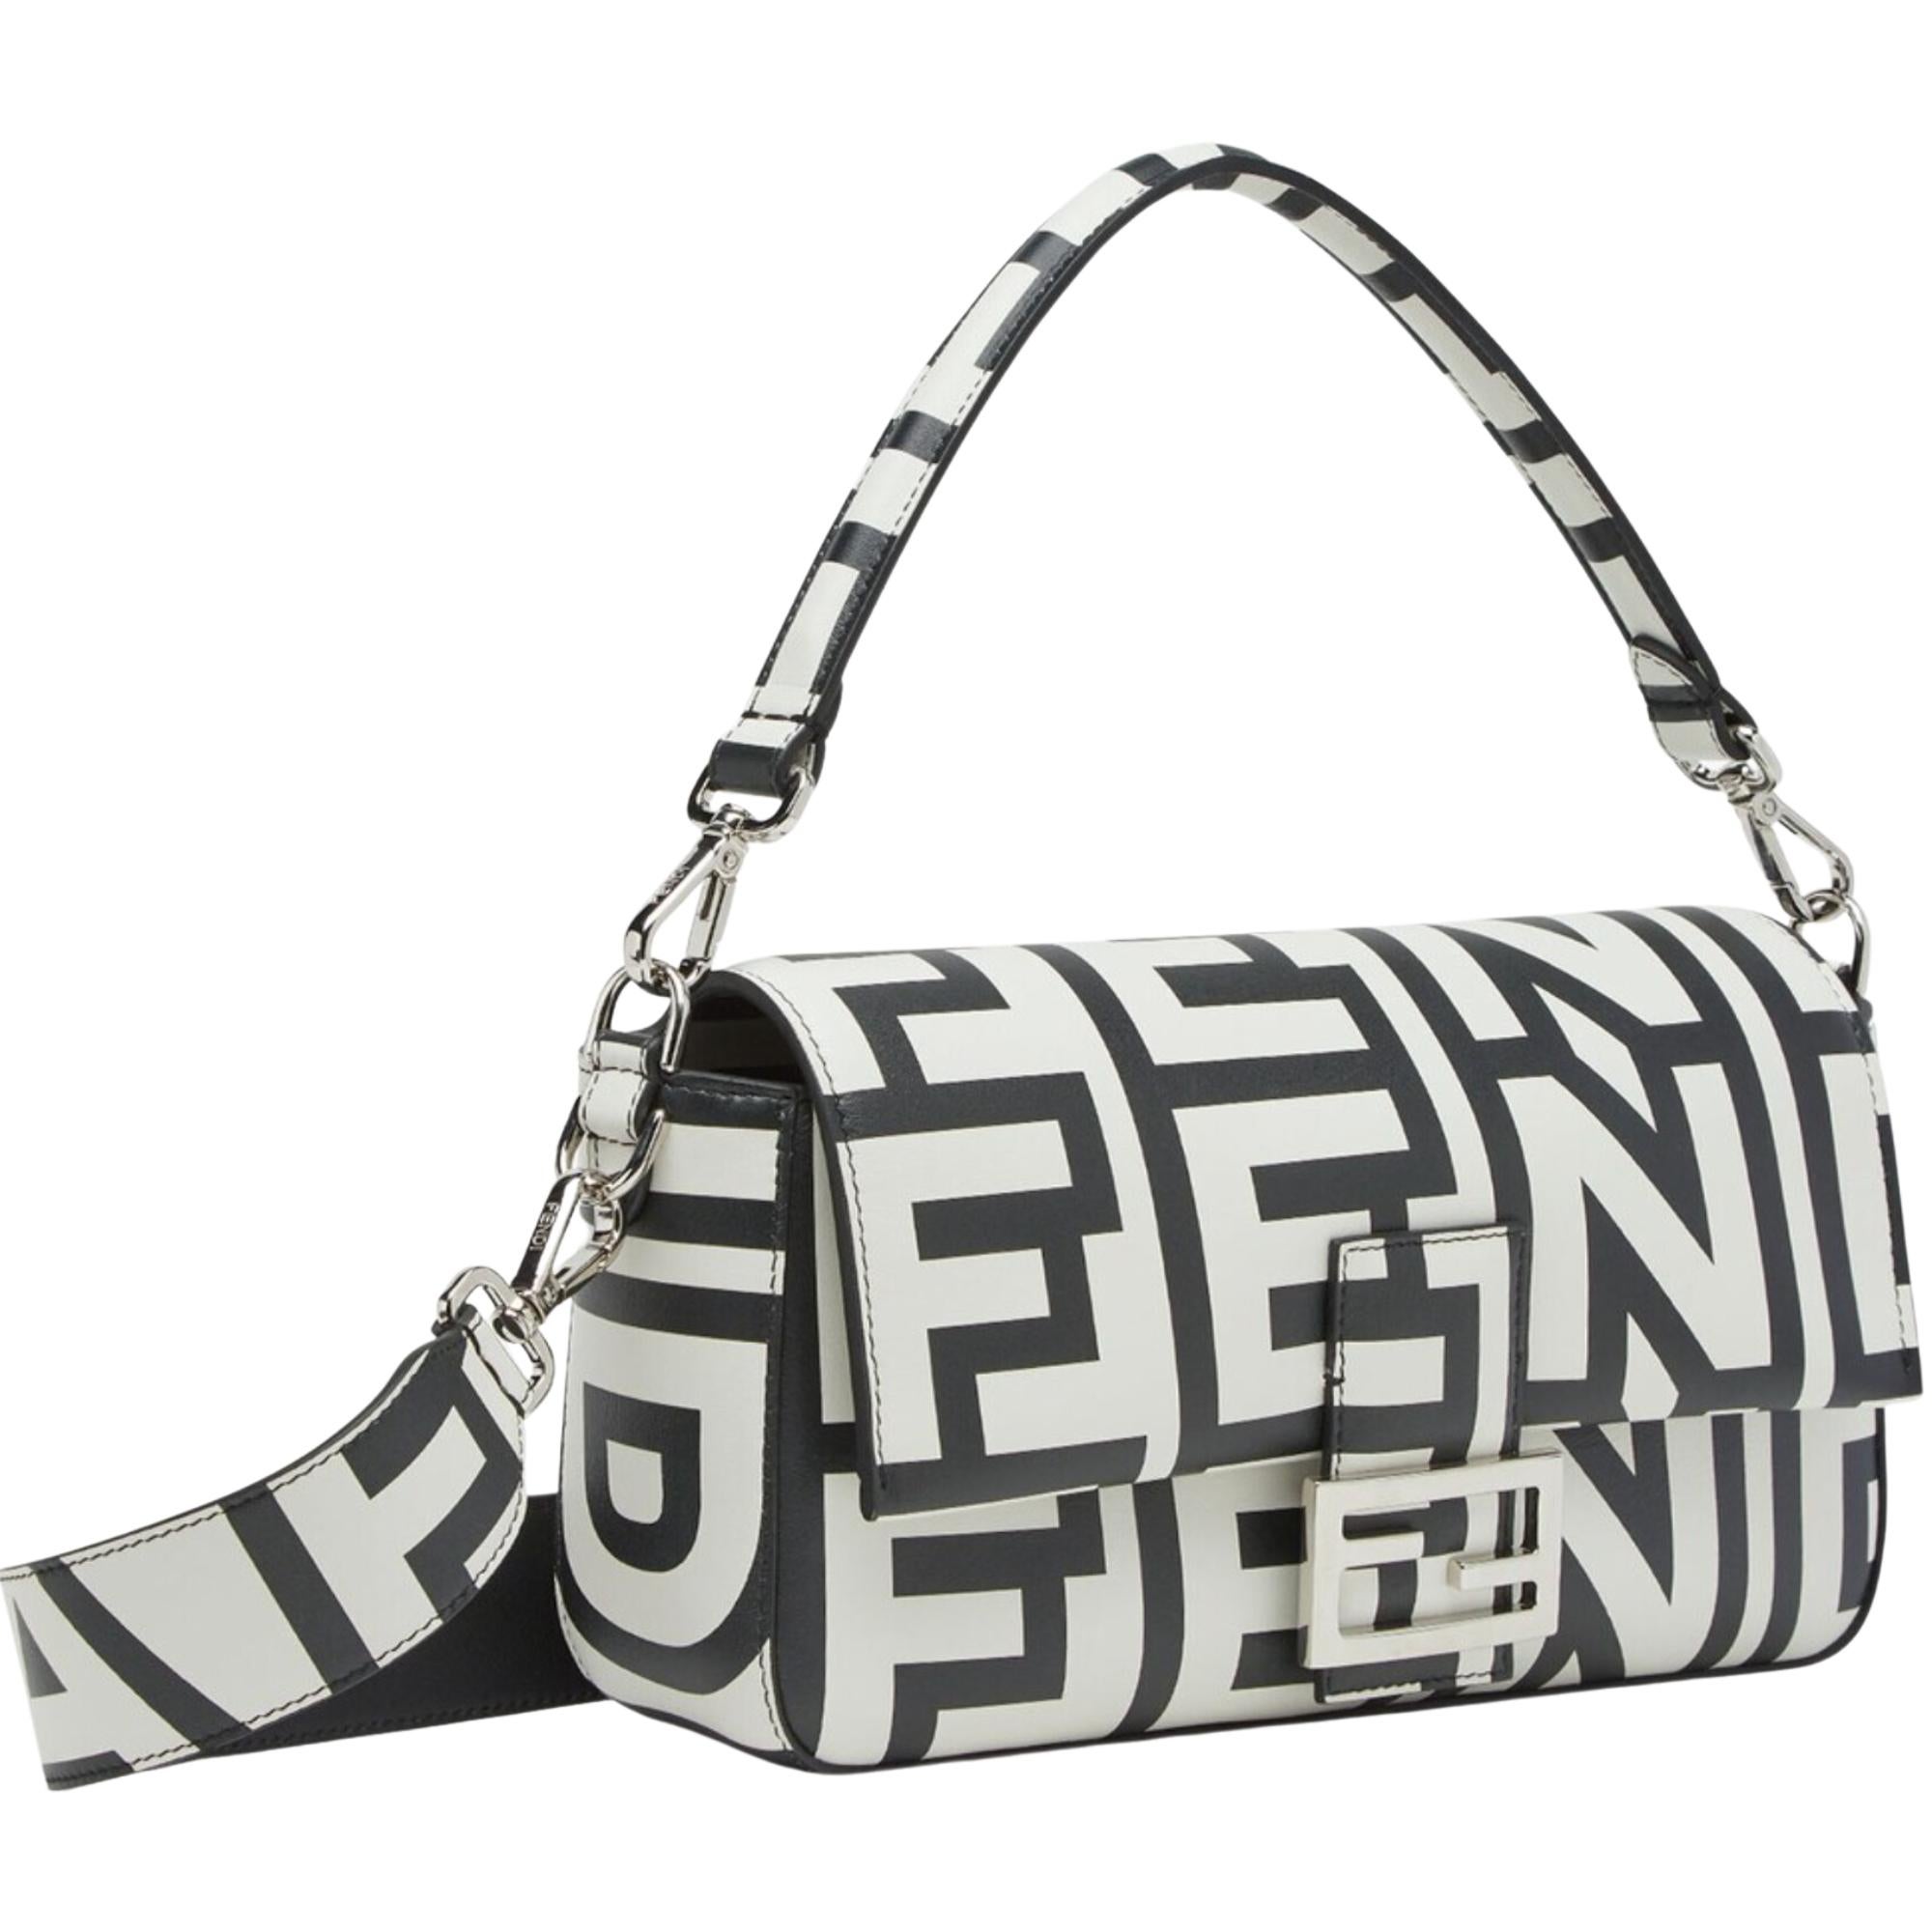 This iconic baguette bag is part of the fendi by marc jacobs limited edition. This style is made of leather with a macro version of the fendi logo printed all over in black and white. Featuring a front flap, ff magnetic clasp, a single internal